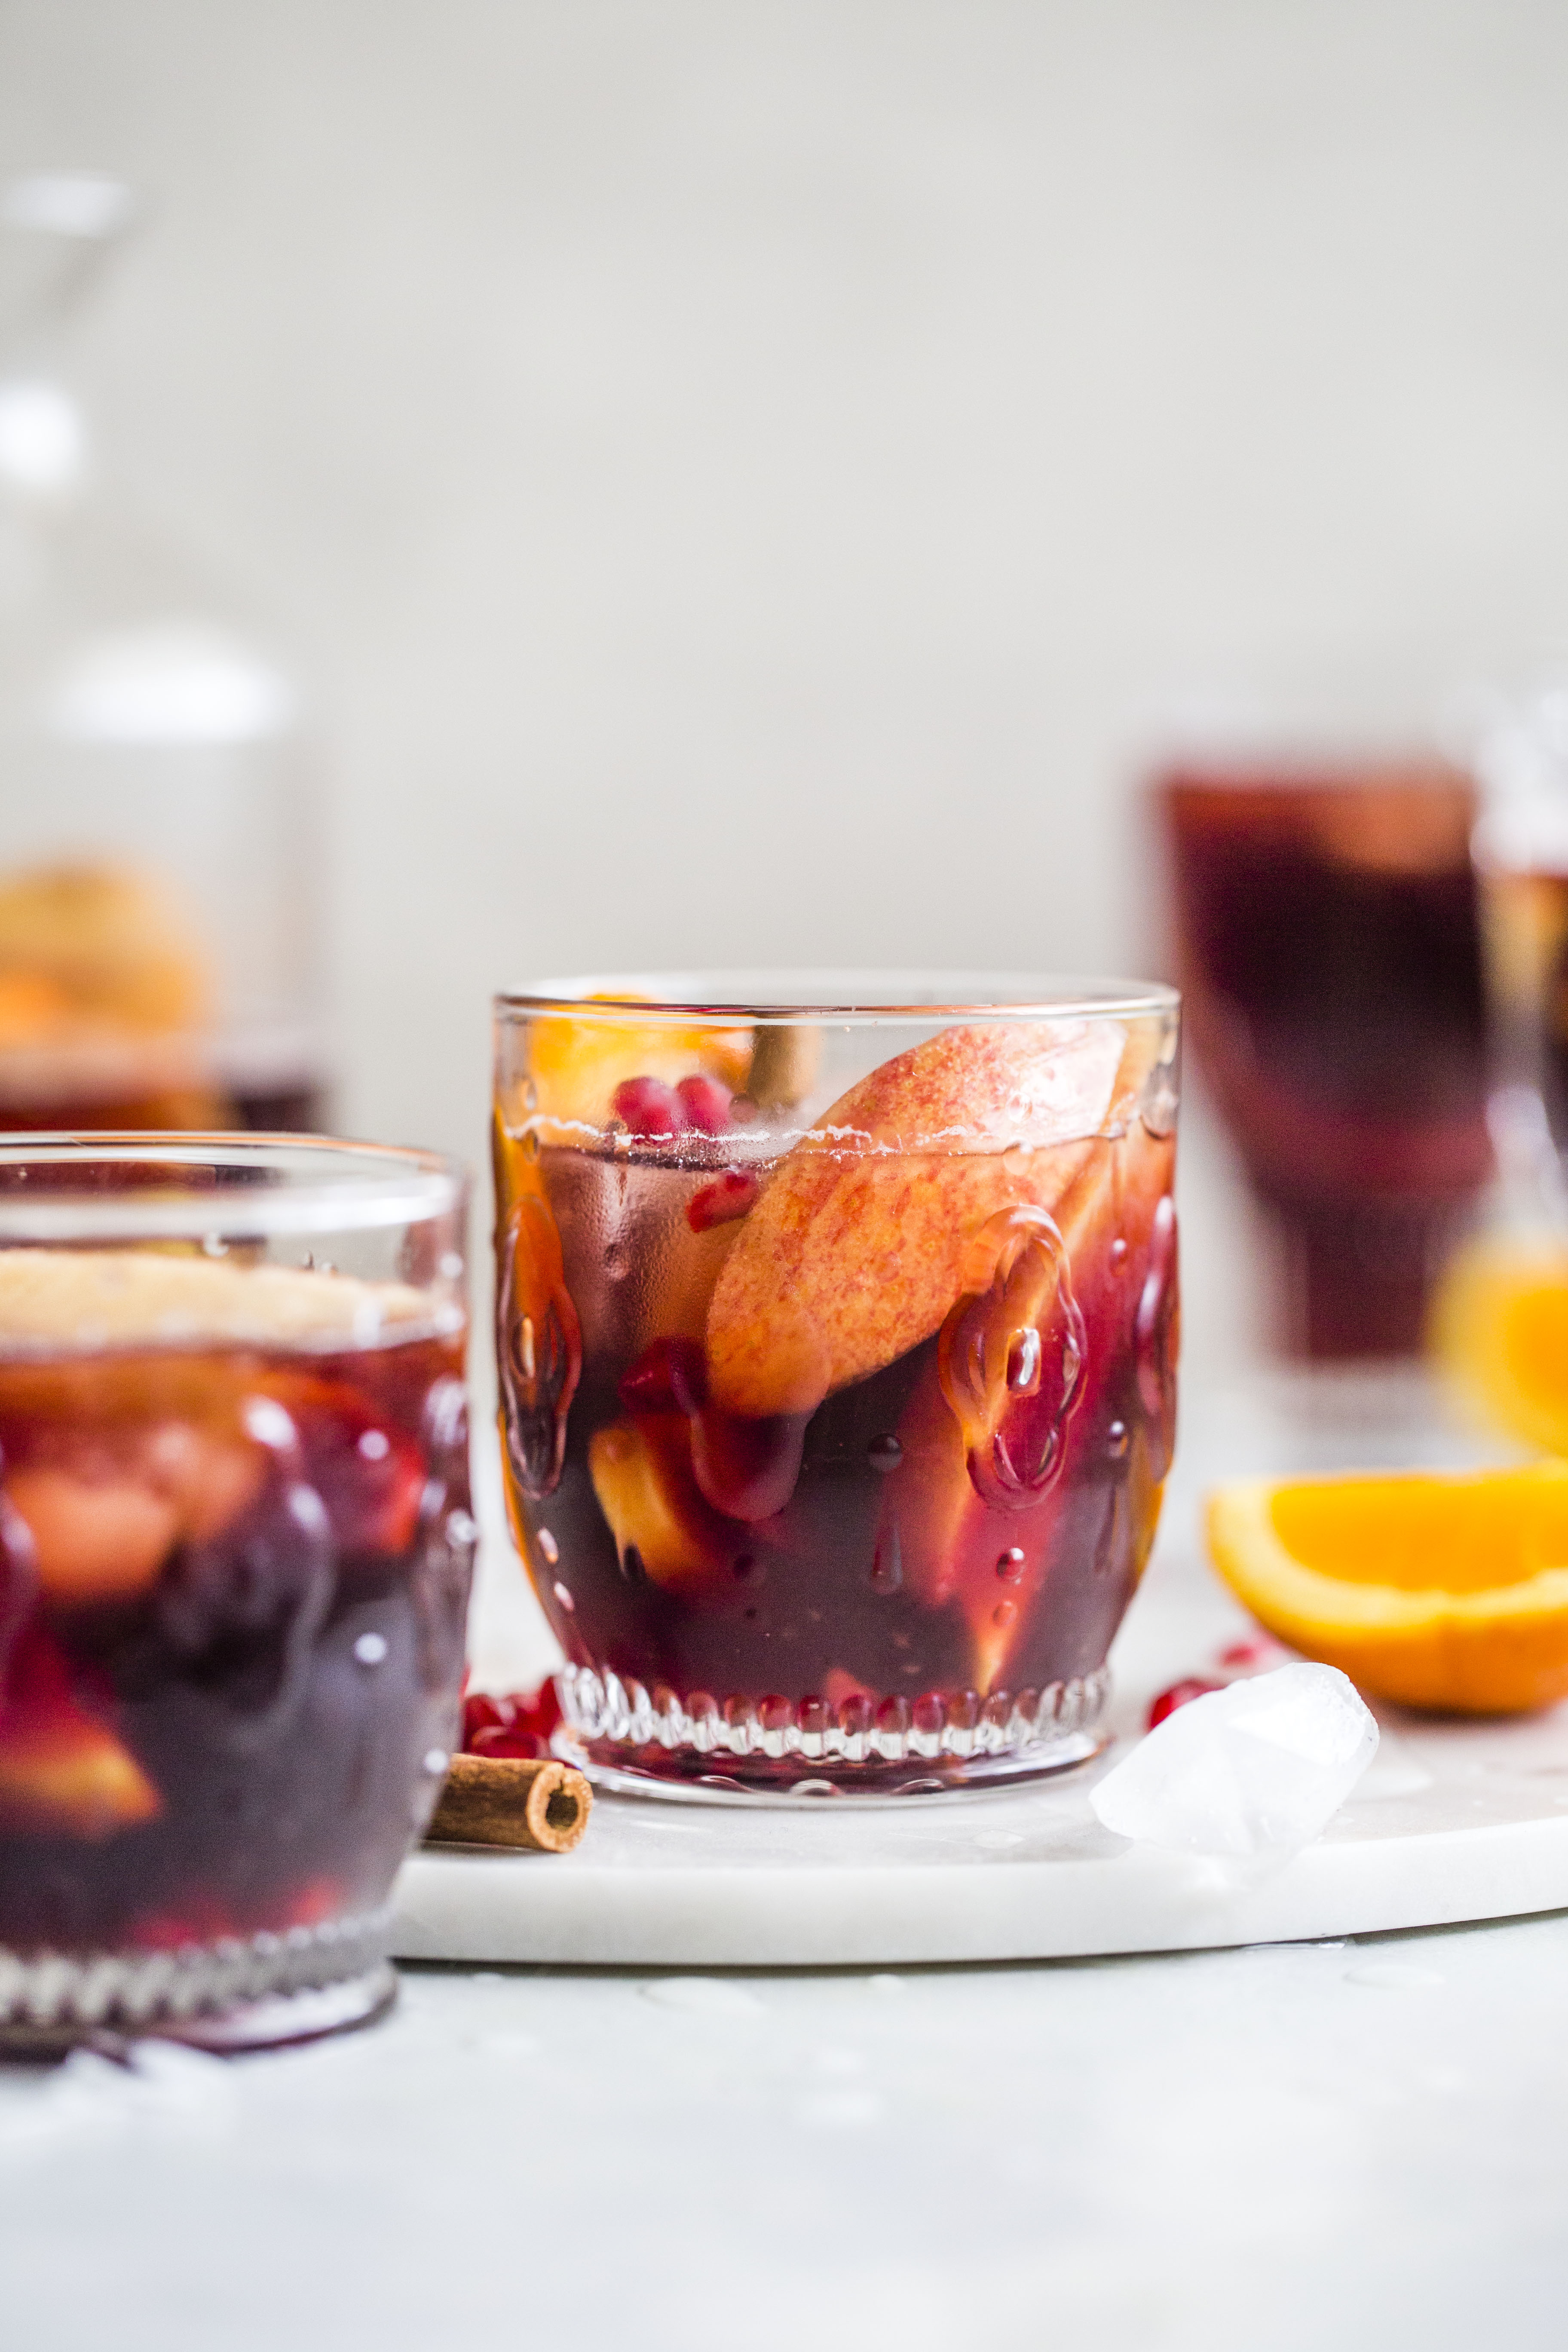 Pomegranate sangria is the best winter sangria ever! It comes in the form of delicious pomegranate vanilla sangria with lots of red wine and brandy. It's perfect for the cooler months and it will warm you right up. I howsweeteats.com #pomegranate #sangria